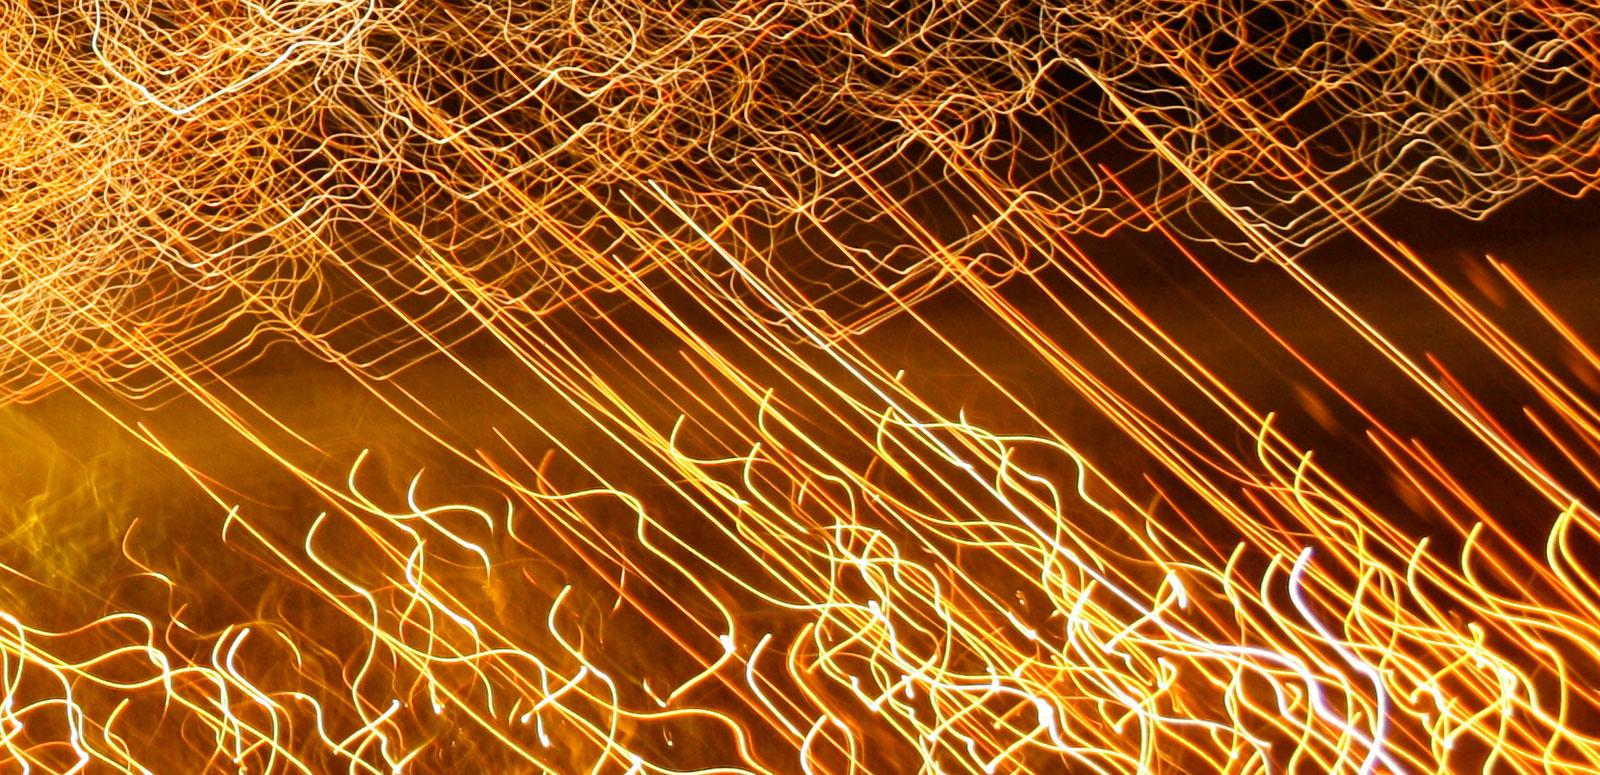 A long exposure image of lights. They have left trails across the image.